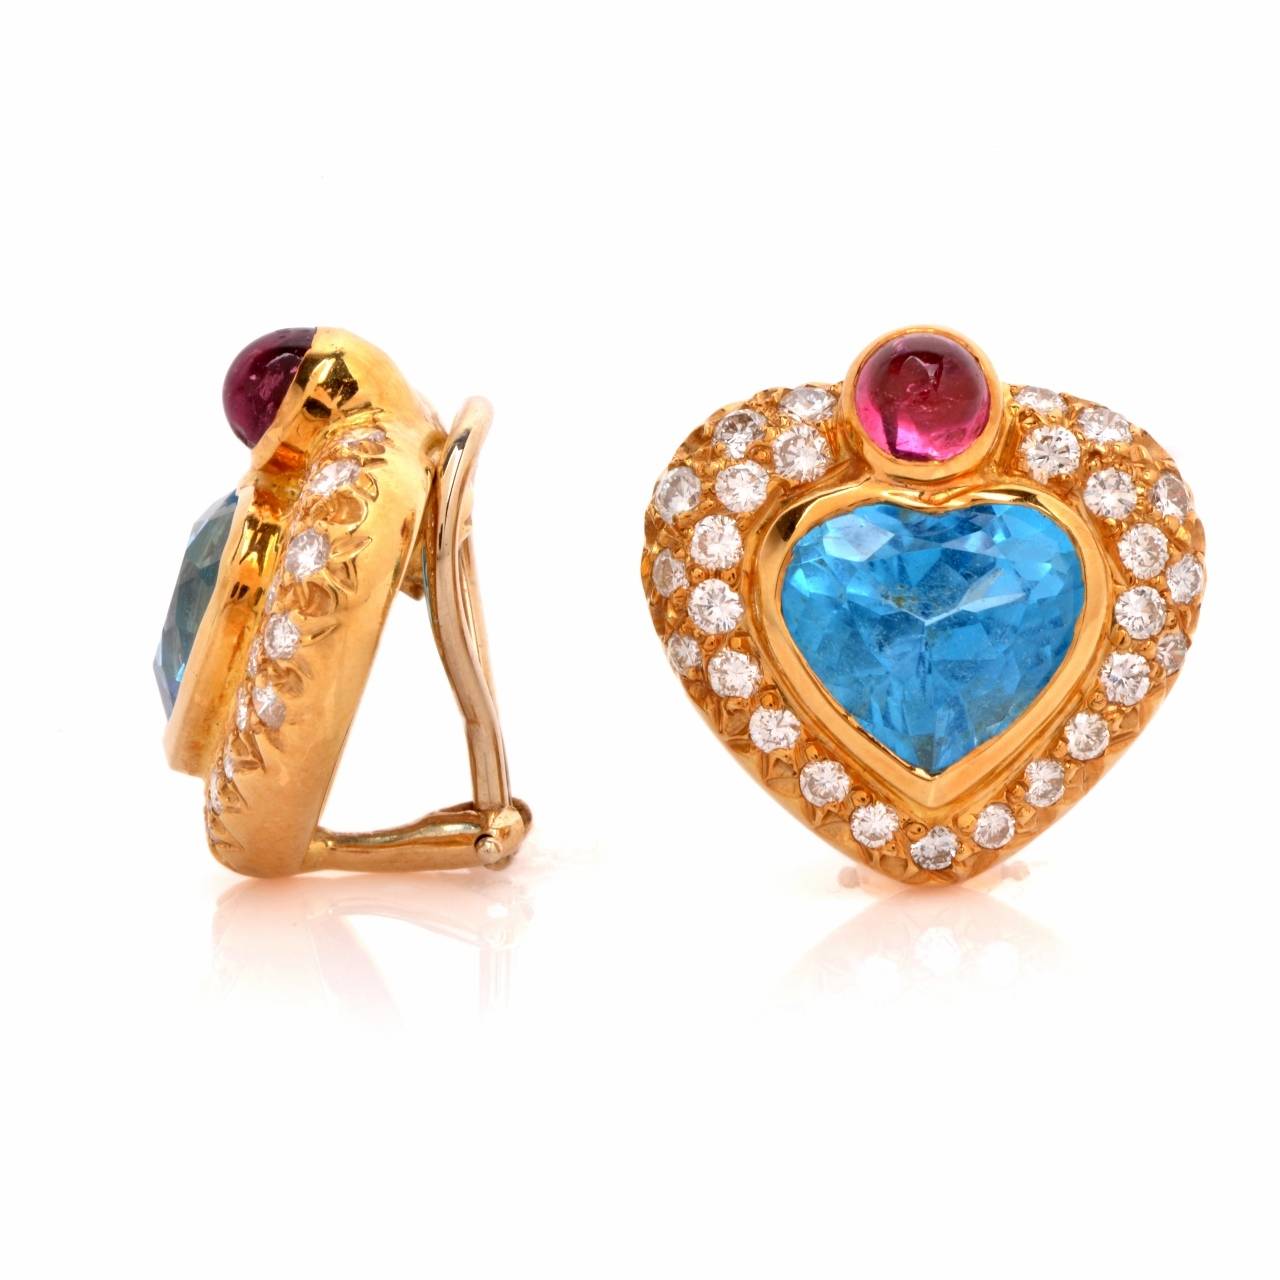 These vividly colored, romantically inspired 1980’s clip-on earrings are crafted in solid 18K yellow gold, weighing 16.2 grams and measuring 20 x 20 mm. Incorporating a pair of heart-shaped profiles, these colorful earrings are centered with